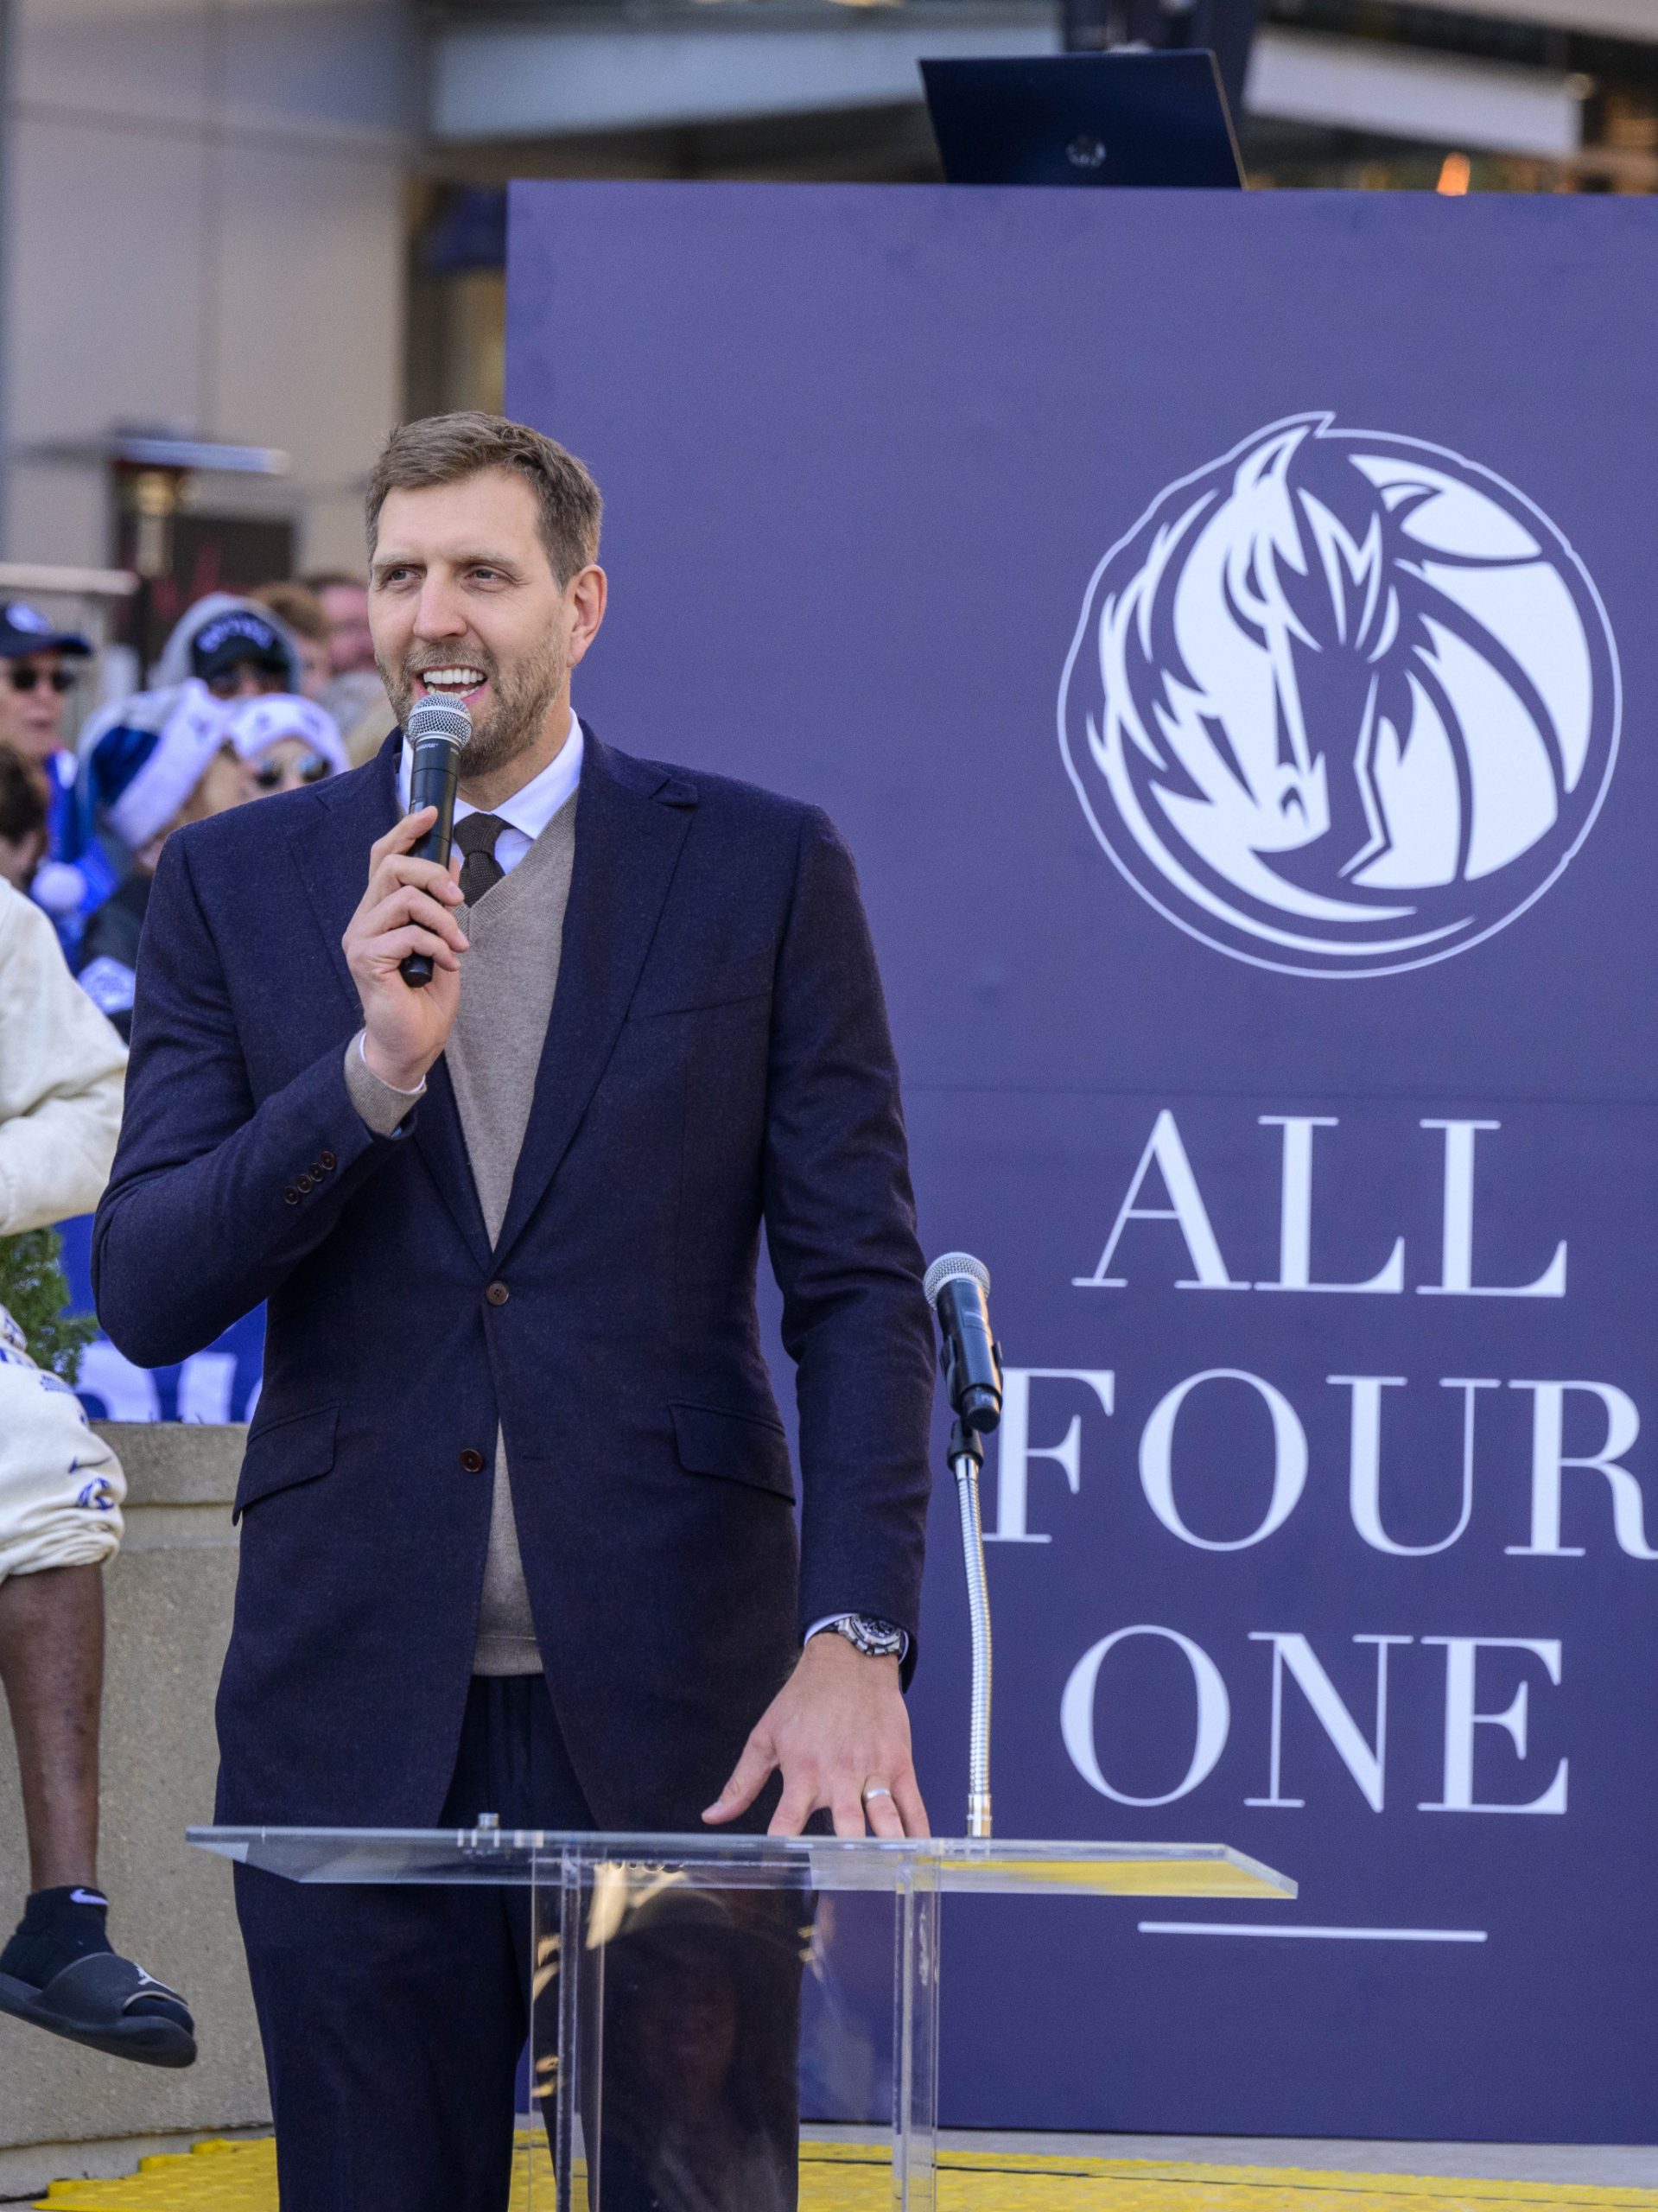 Dec 25, 2022; Dallas, Texas, USA; Former Dallas Mavericks power forward and member of the Hall of Fame 2023 Dirk Nowitzki speaks to the crowd during the ceremony for the unveiling of a statue honoring his playing career before the game between the Dallas Mavericks and the Los Angeles Lakers American Airlines Center . Mandatory Credit: Jerome Miron-USA TODAY Sports